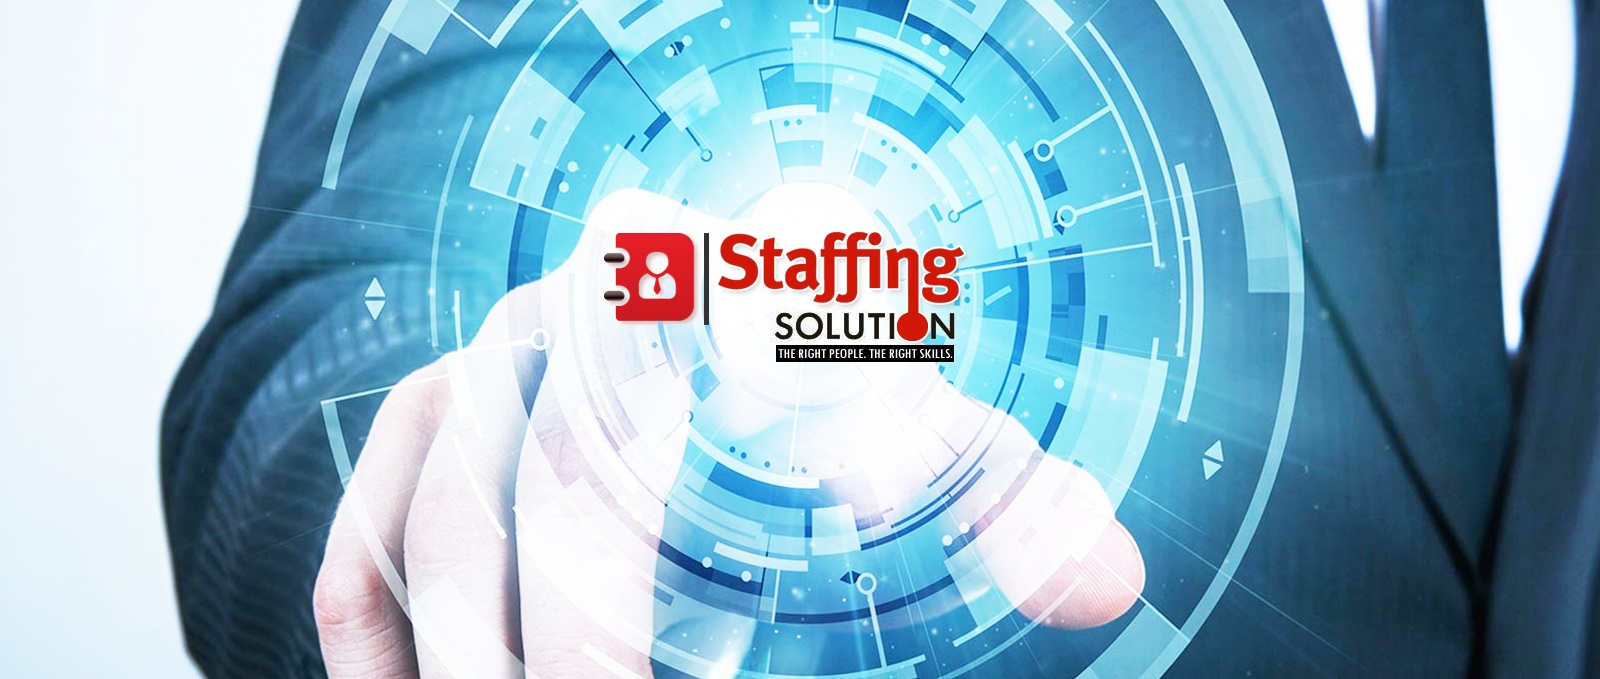 it staffing solutions